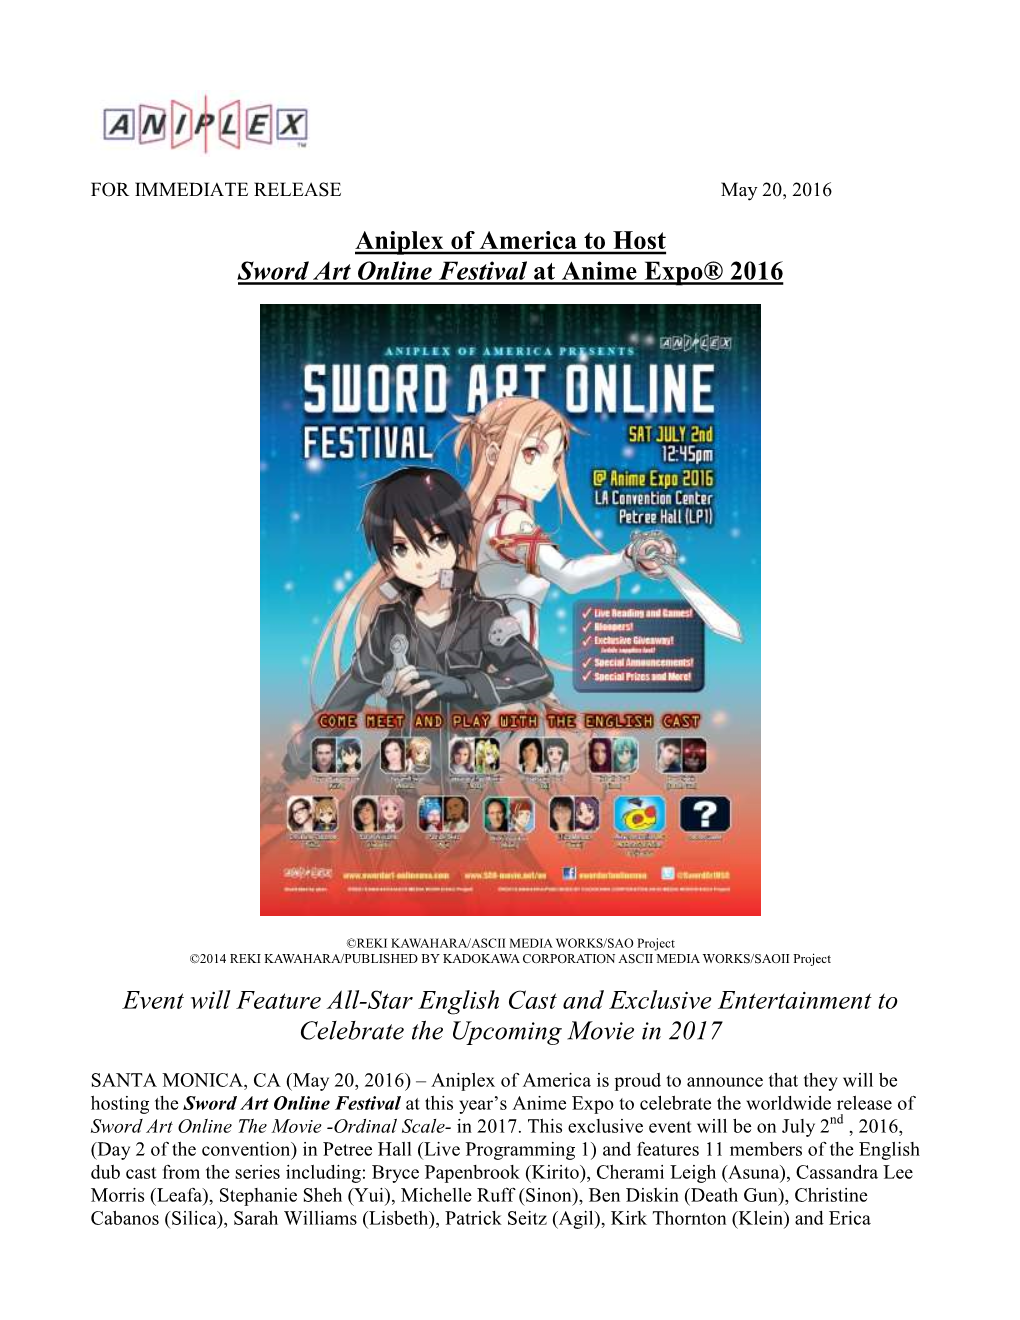 Aniplex of America to Host Sword Art Online Festival at Anime Expo® 2016